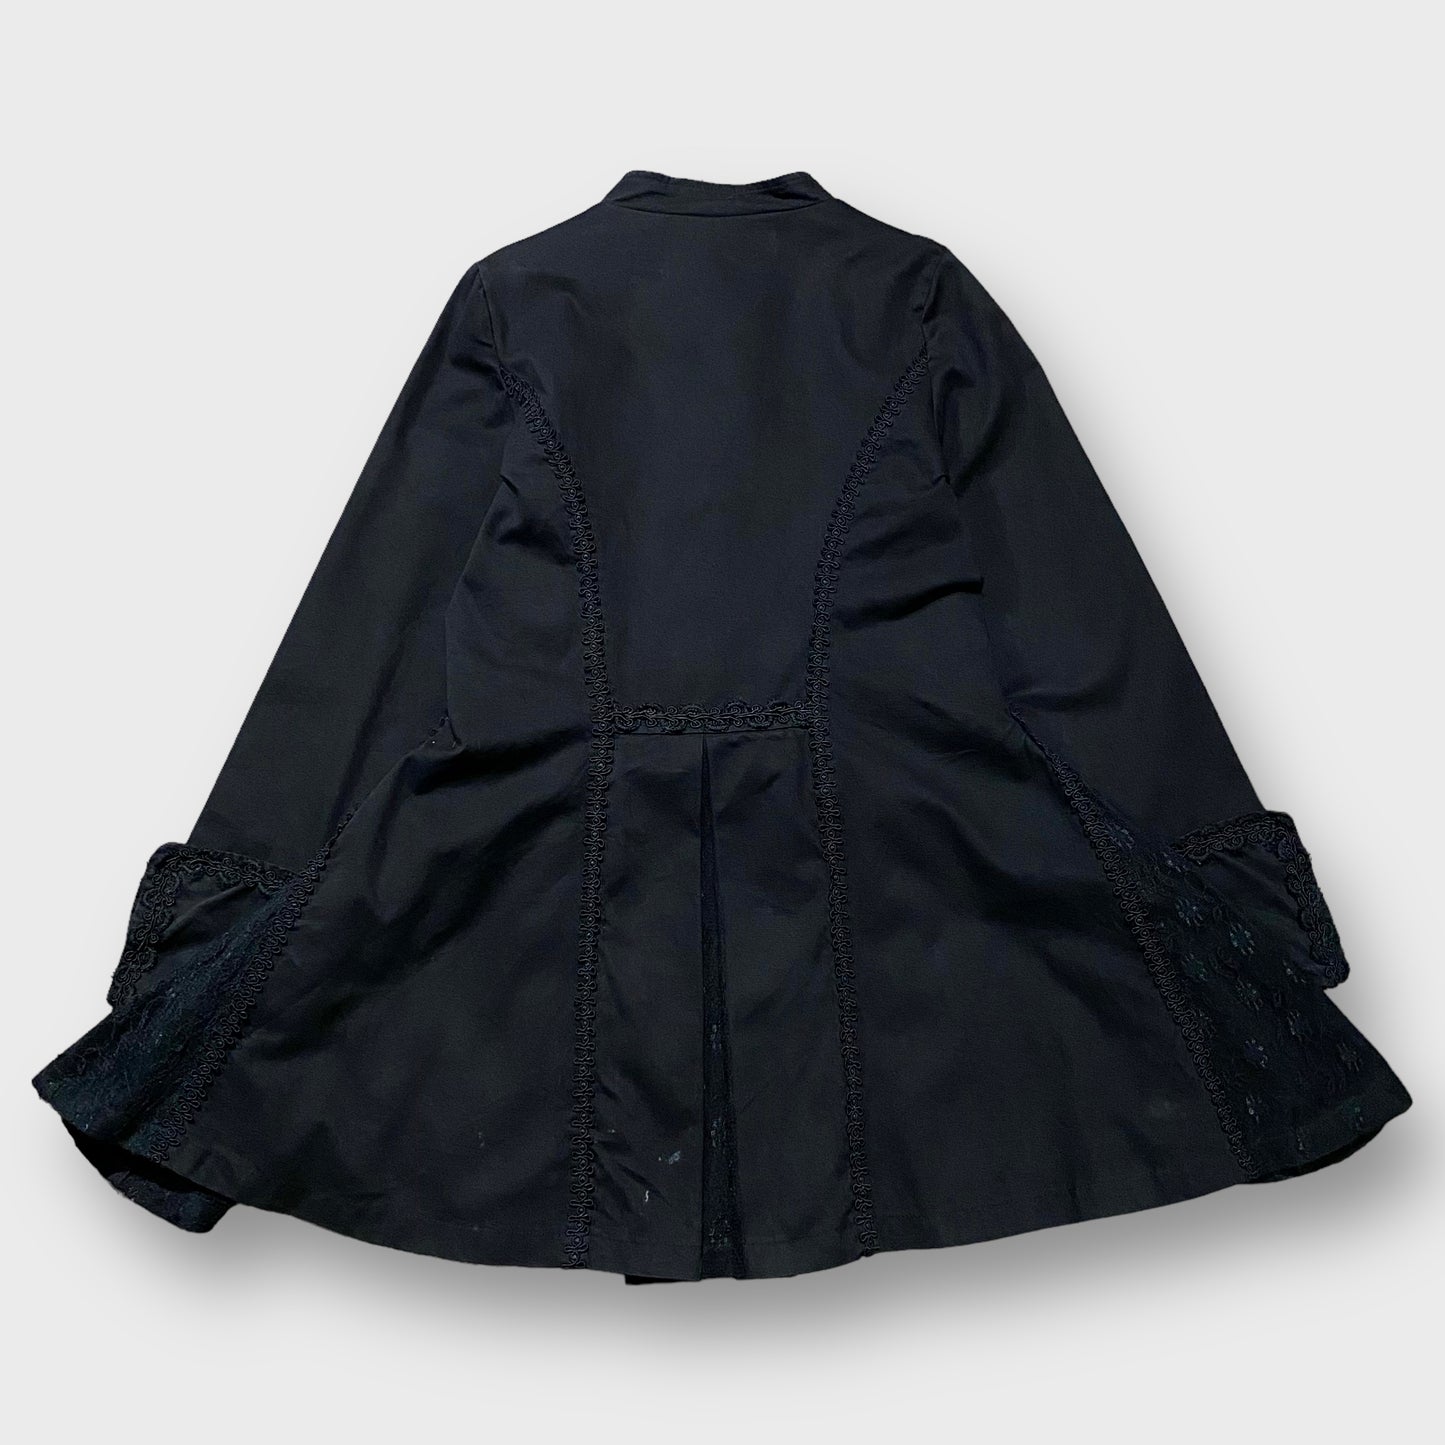 "TRIPPNYC" Gimmick type chinese coat